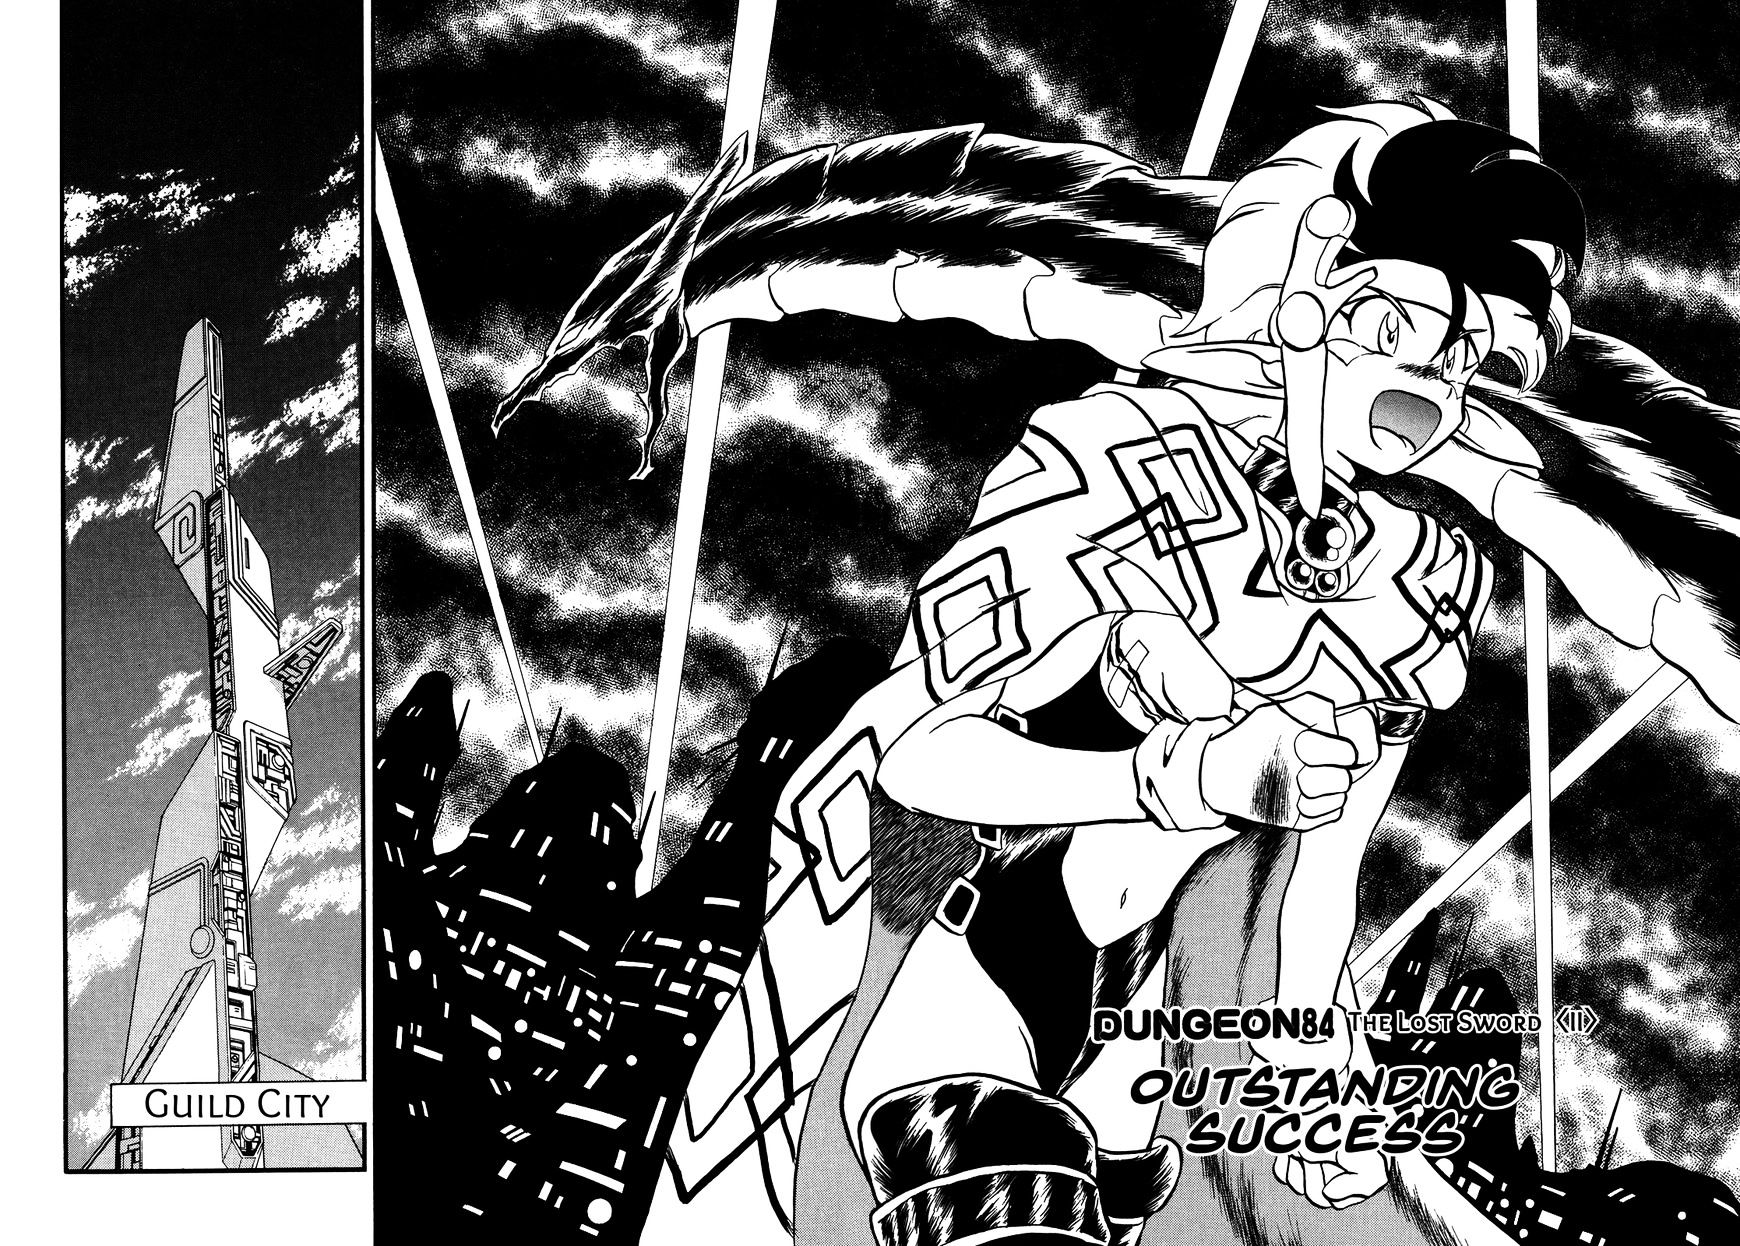 Ozanari Dungeon Chapter 84 : The Lost Sword  - Outstanding Success - Picture 2